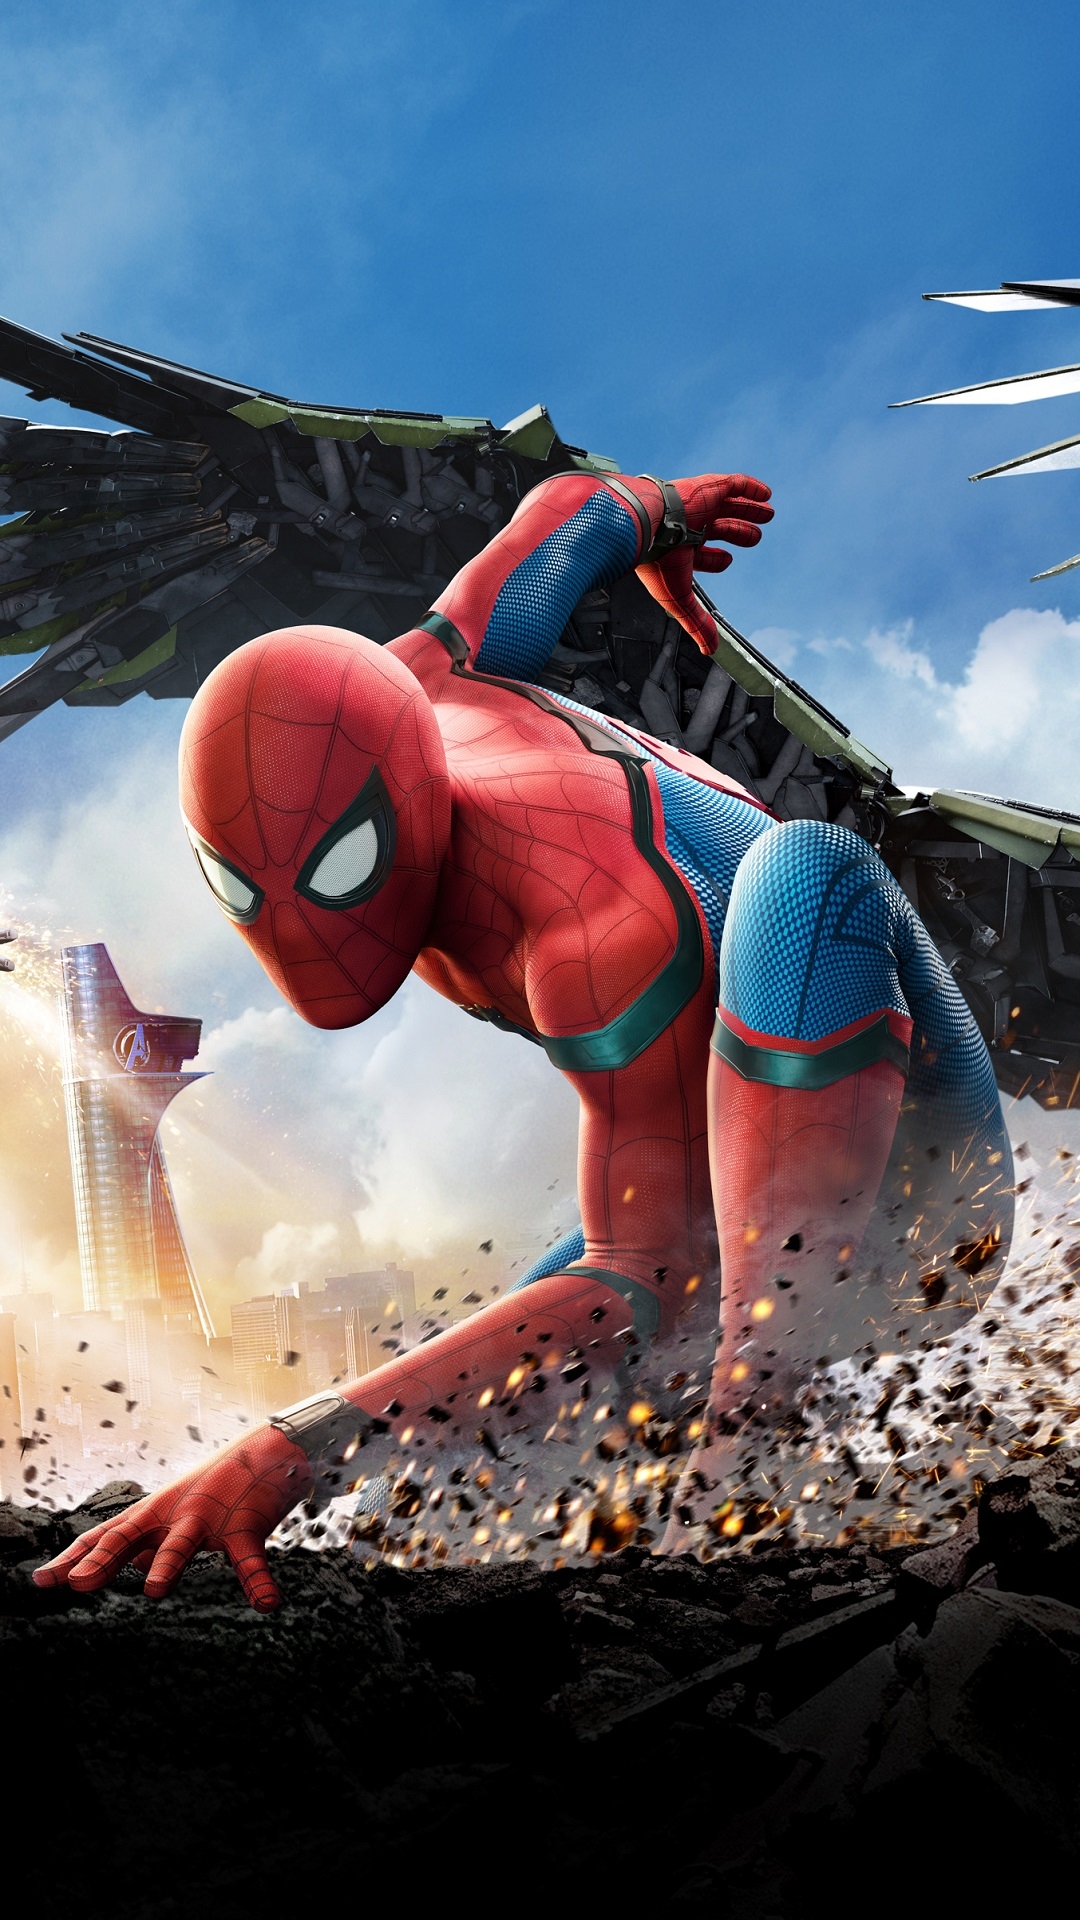 Spiderman Home Coming 2017 for Apple iPhone 6S & 7 Plus resolution